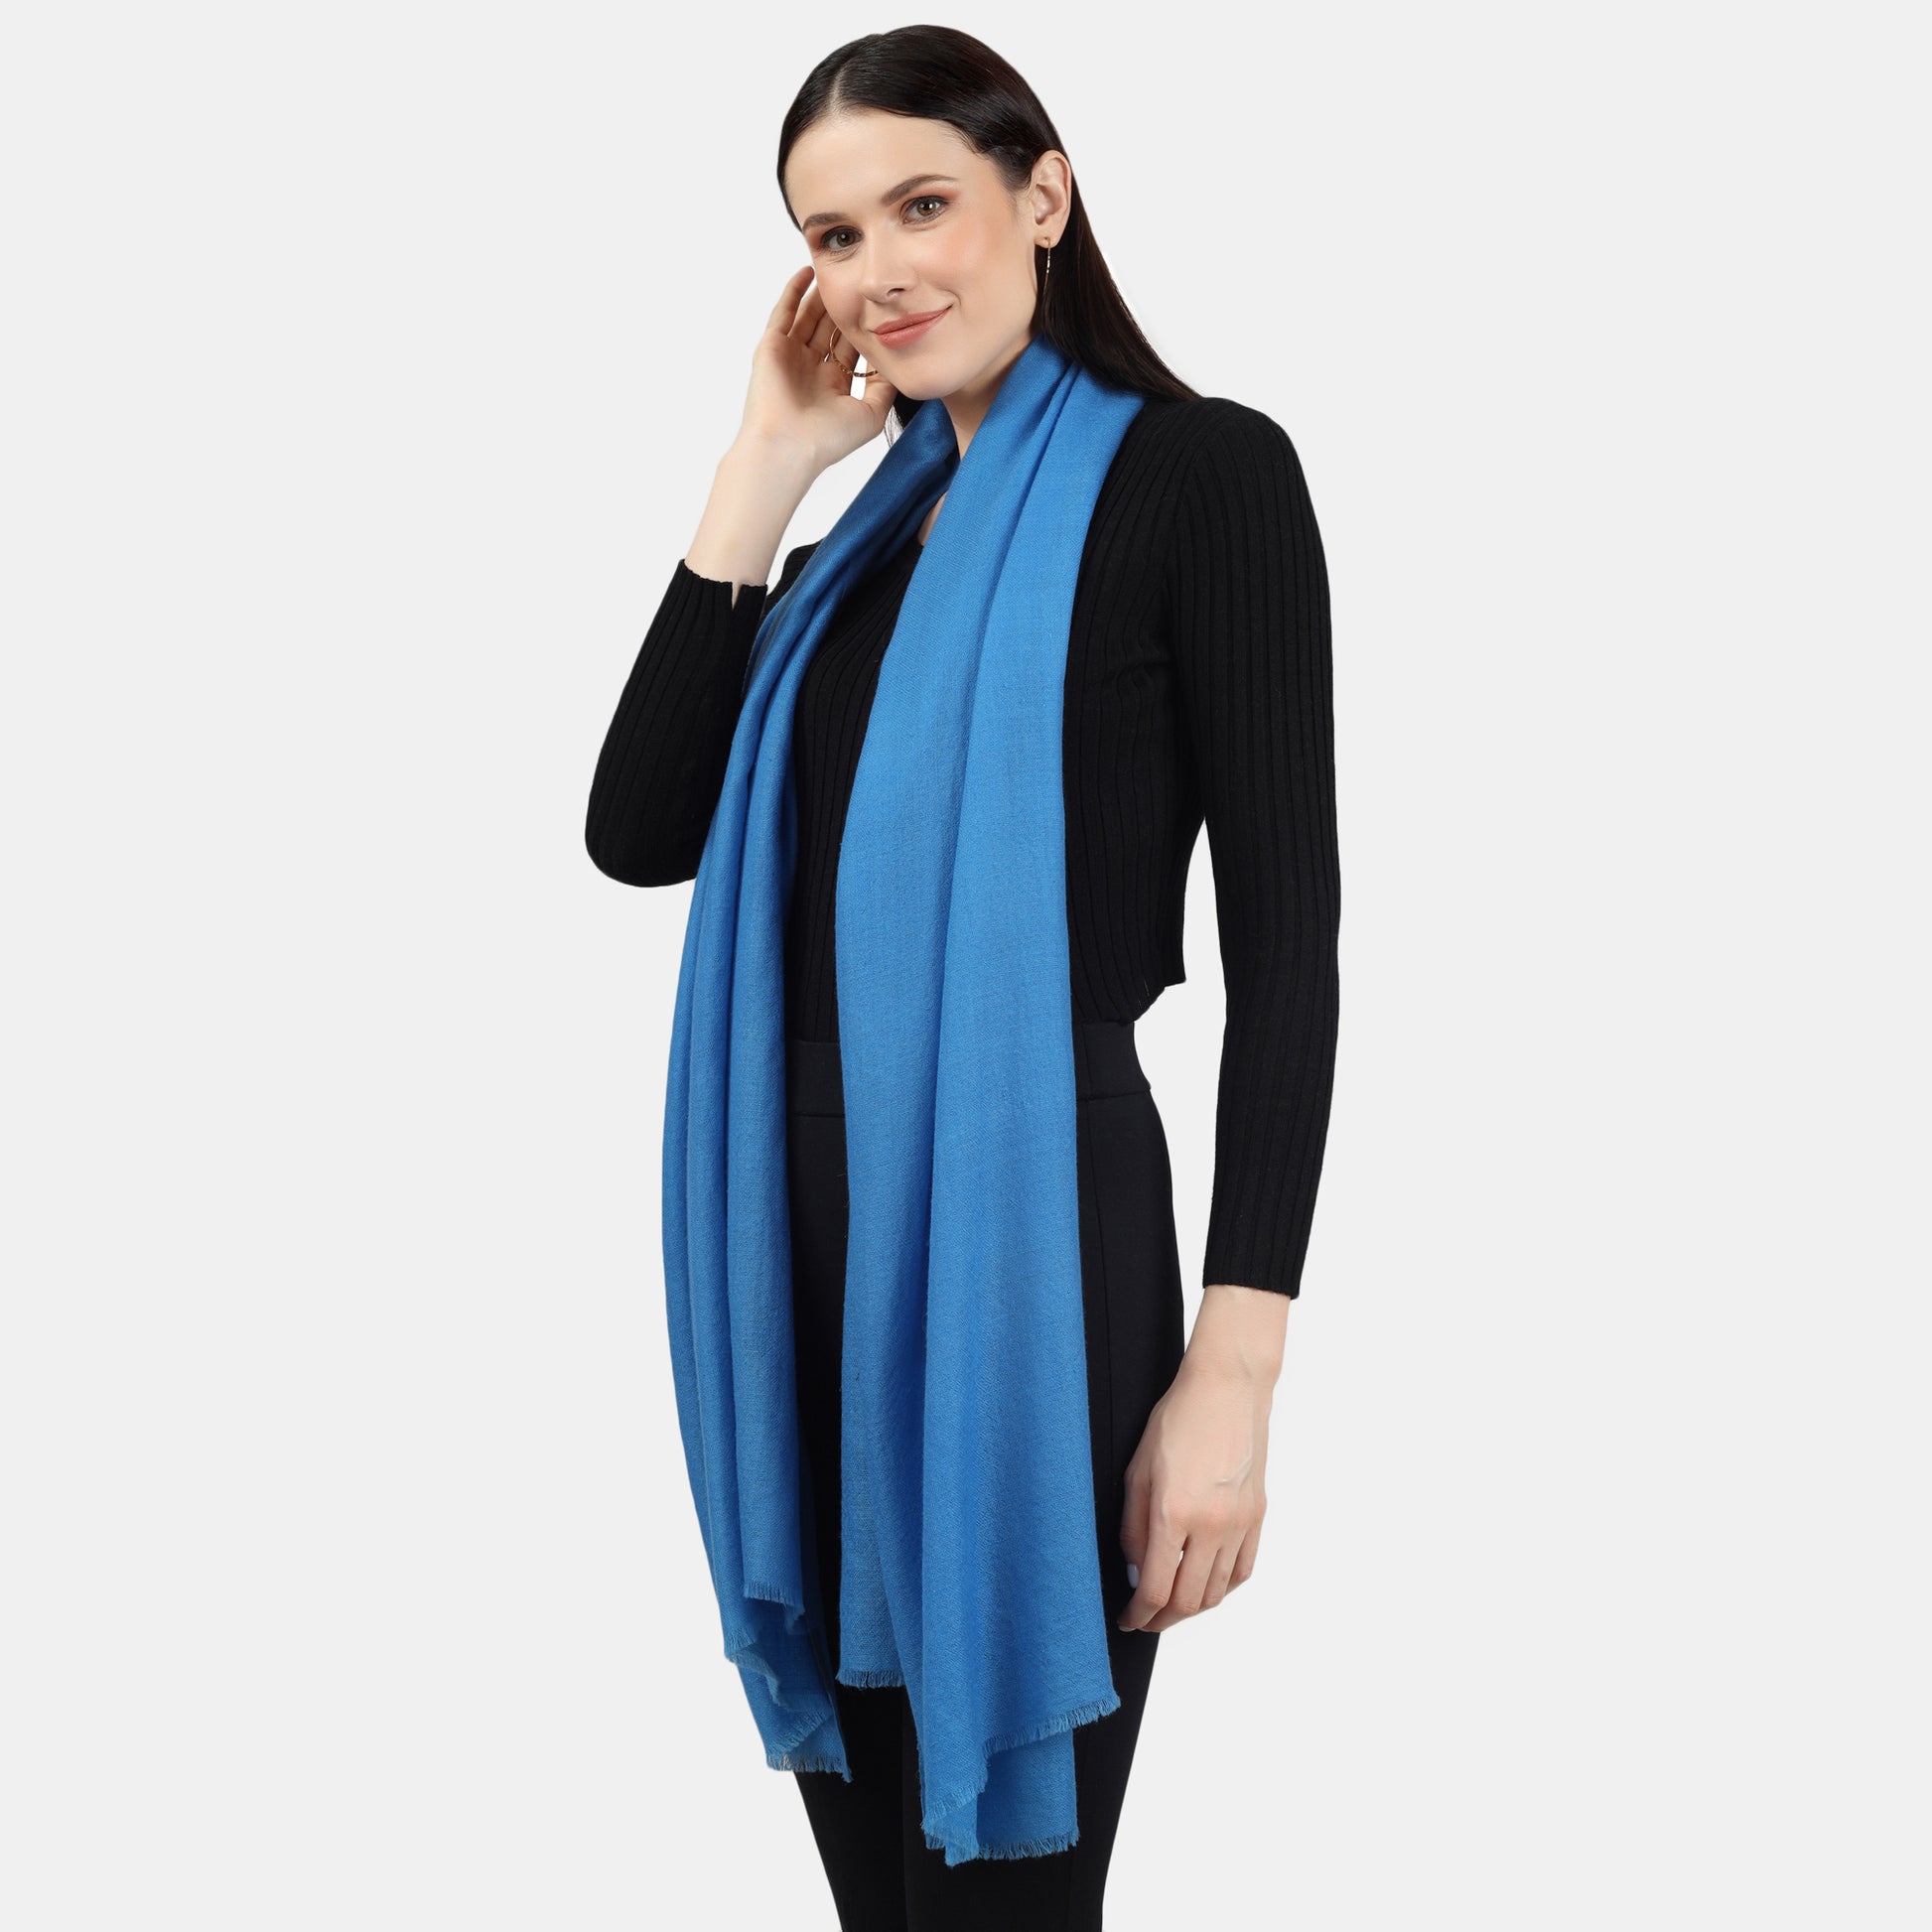 Image of a woman wearing a blue cashmere scarf draped around her neck, with both ends of the scarf hanging on the two sides of her shoulders. The scarf appears to be made with high-quality material and its soft and luxurious texture is visible in the image. The